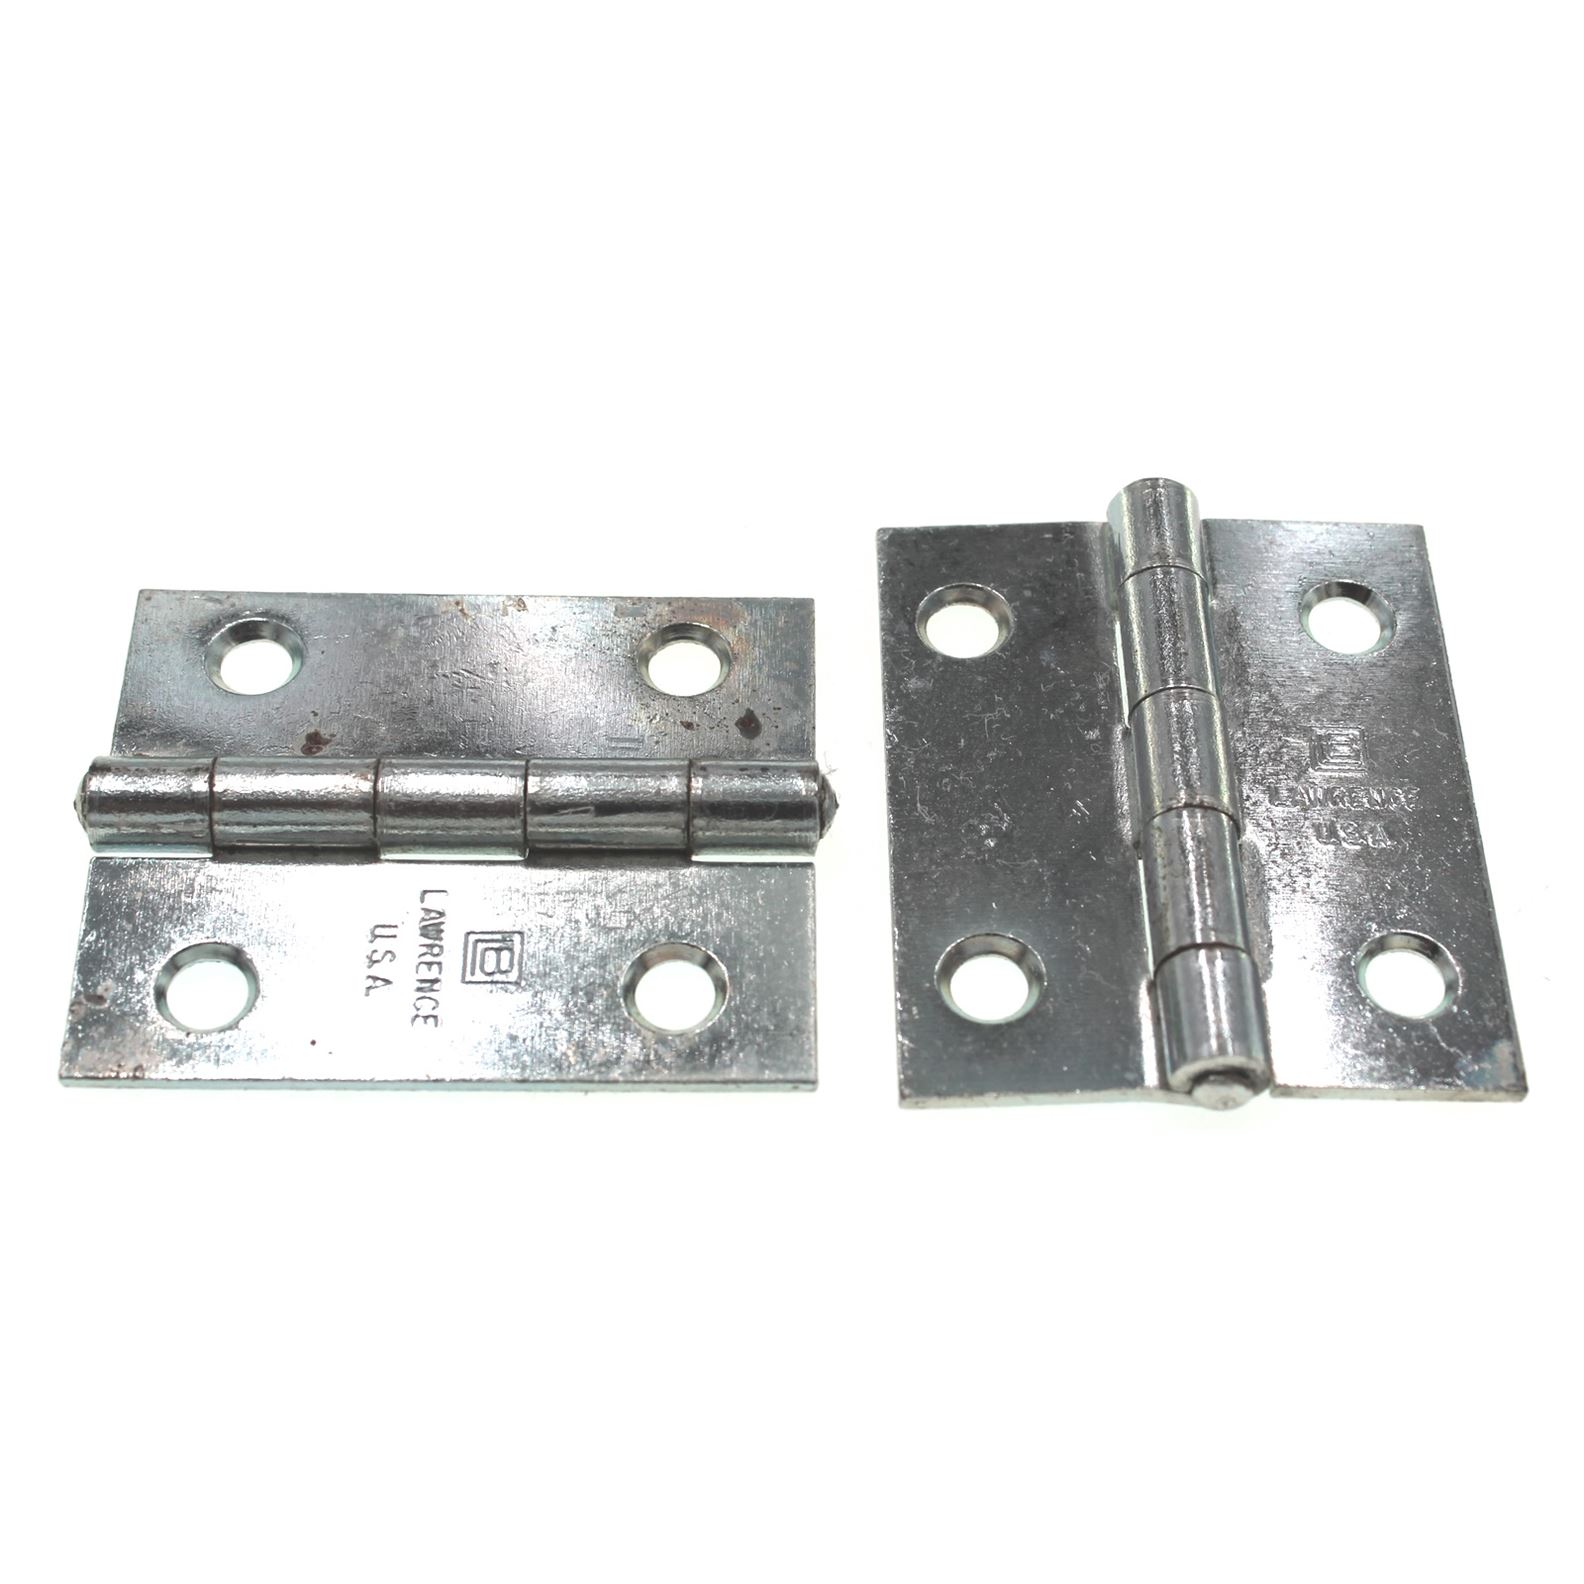 Lawrence Brothers 2" x 1 11/16" Riveted Pin Narrow Hinges 2 Pack D810S-ZN